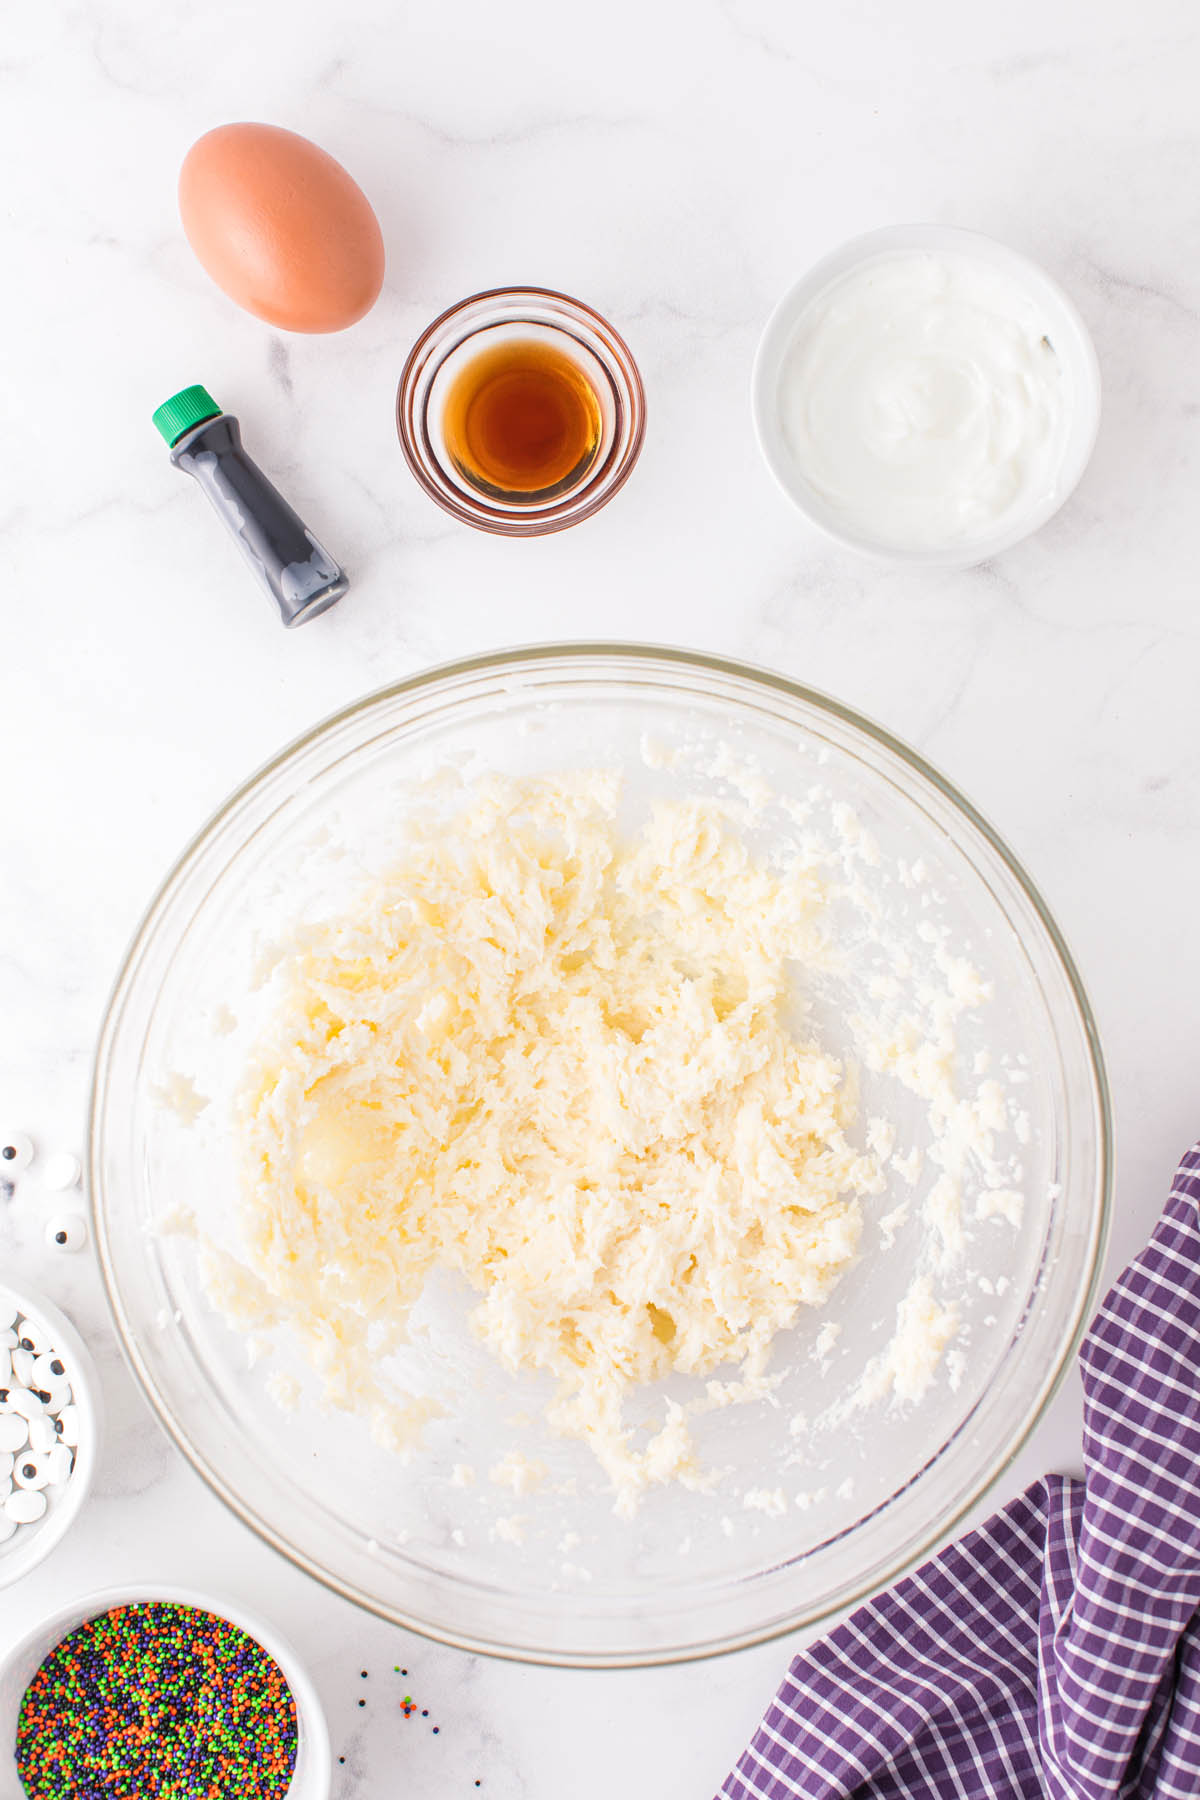 Beat the sugar and butter together with a mixer until creamy and fluffy